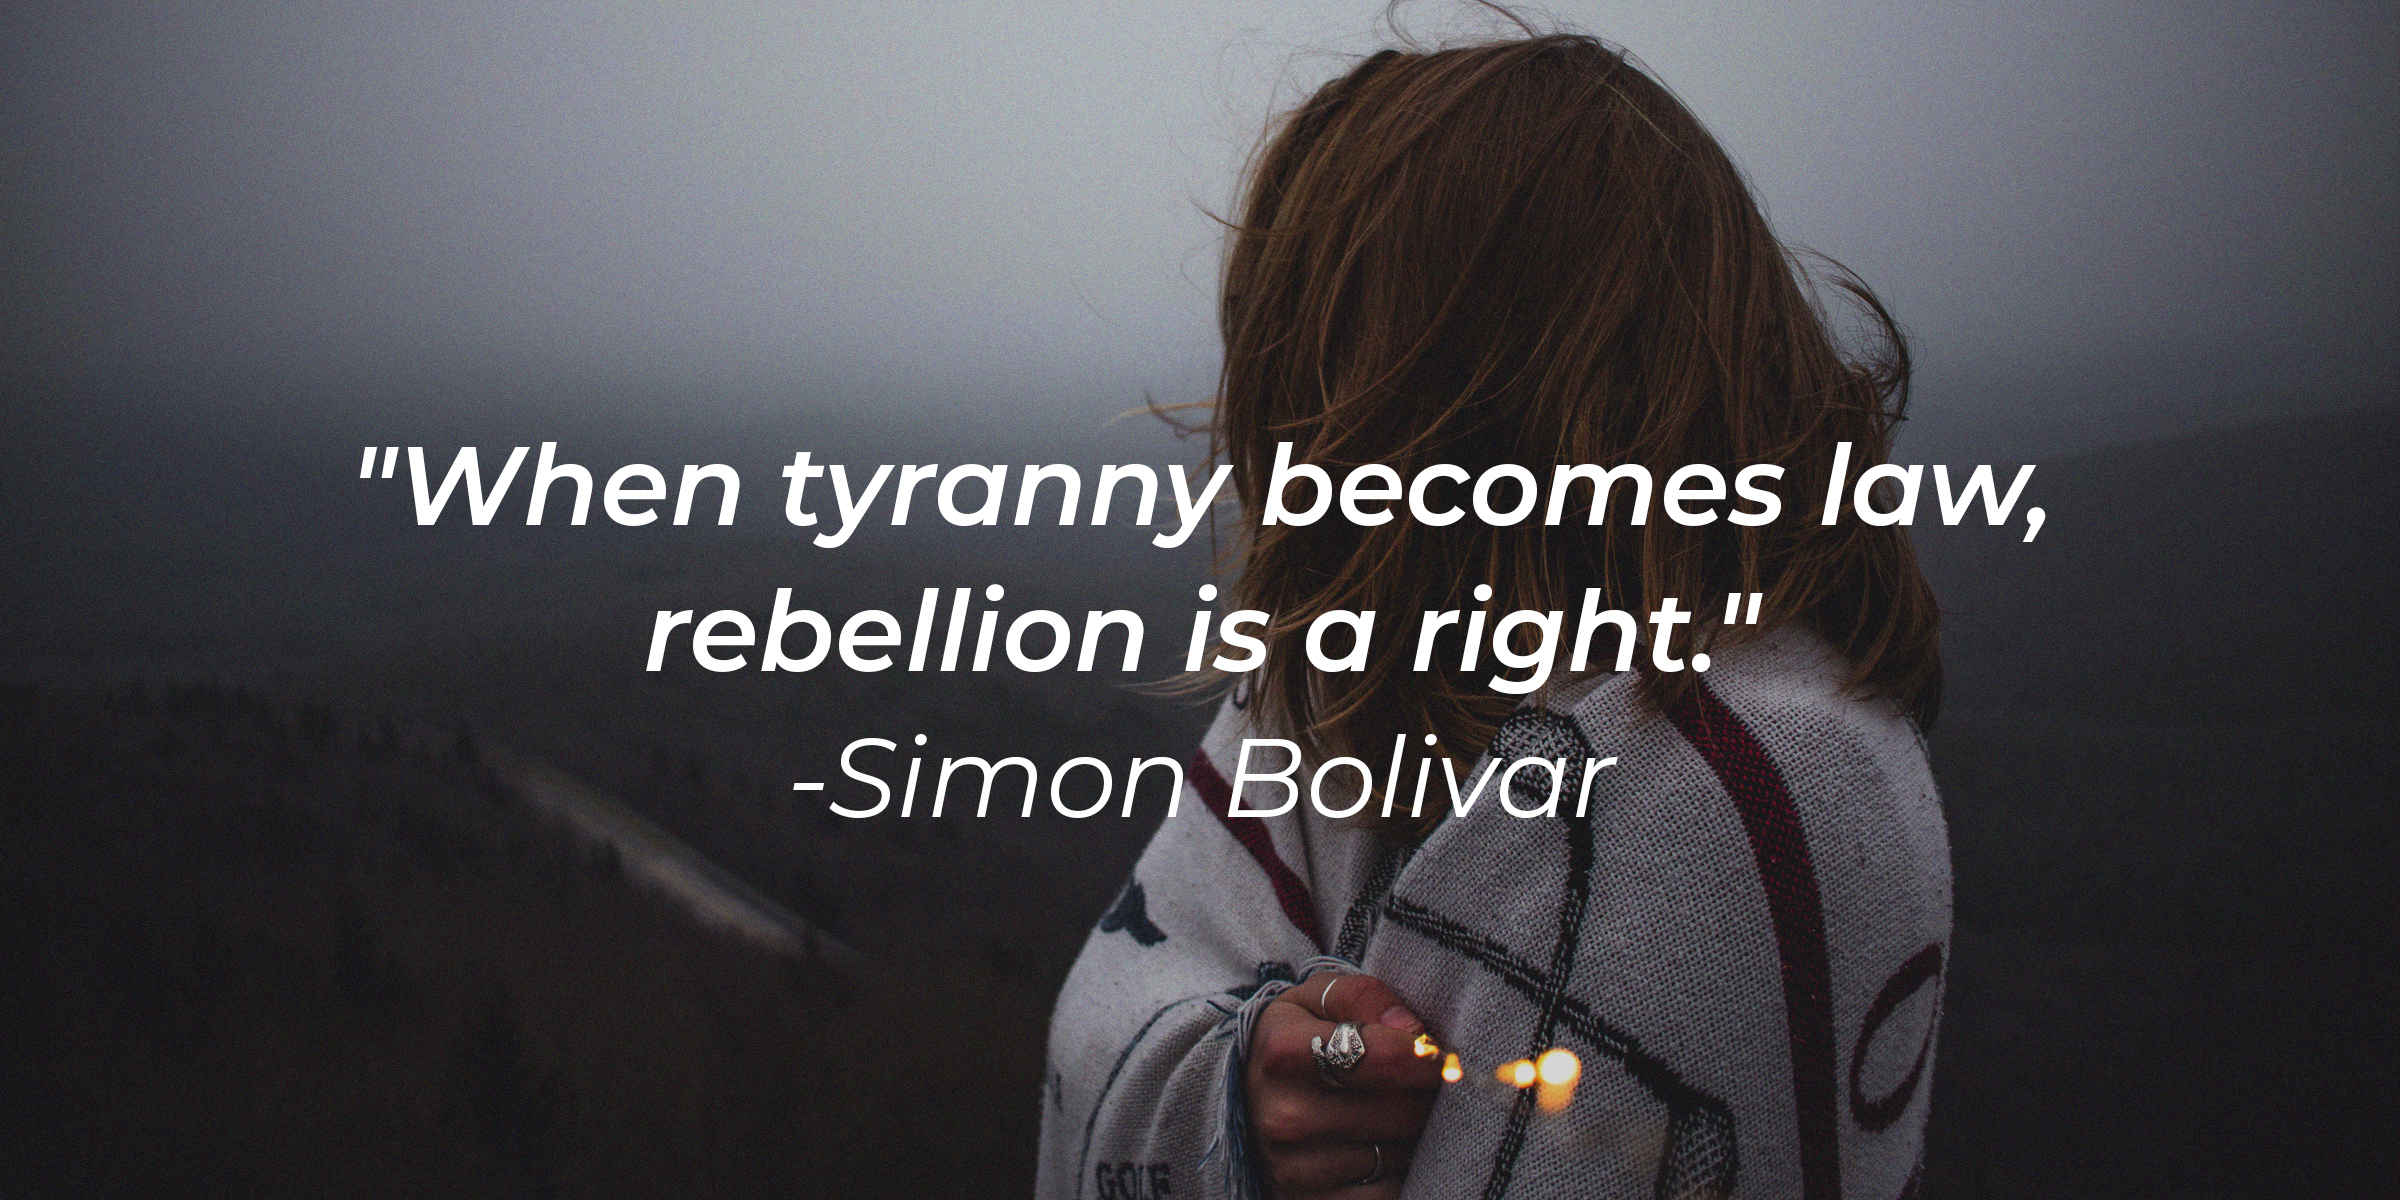 Unsplash | Woman looking away with the quote: "When tyranny becomes law, rebellion is a right."